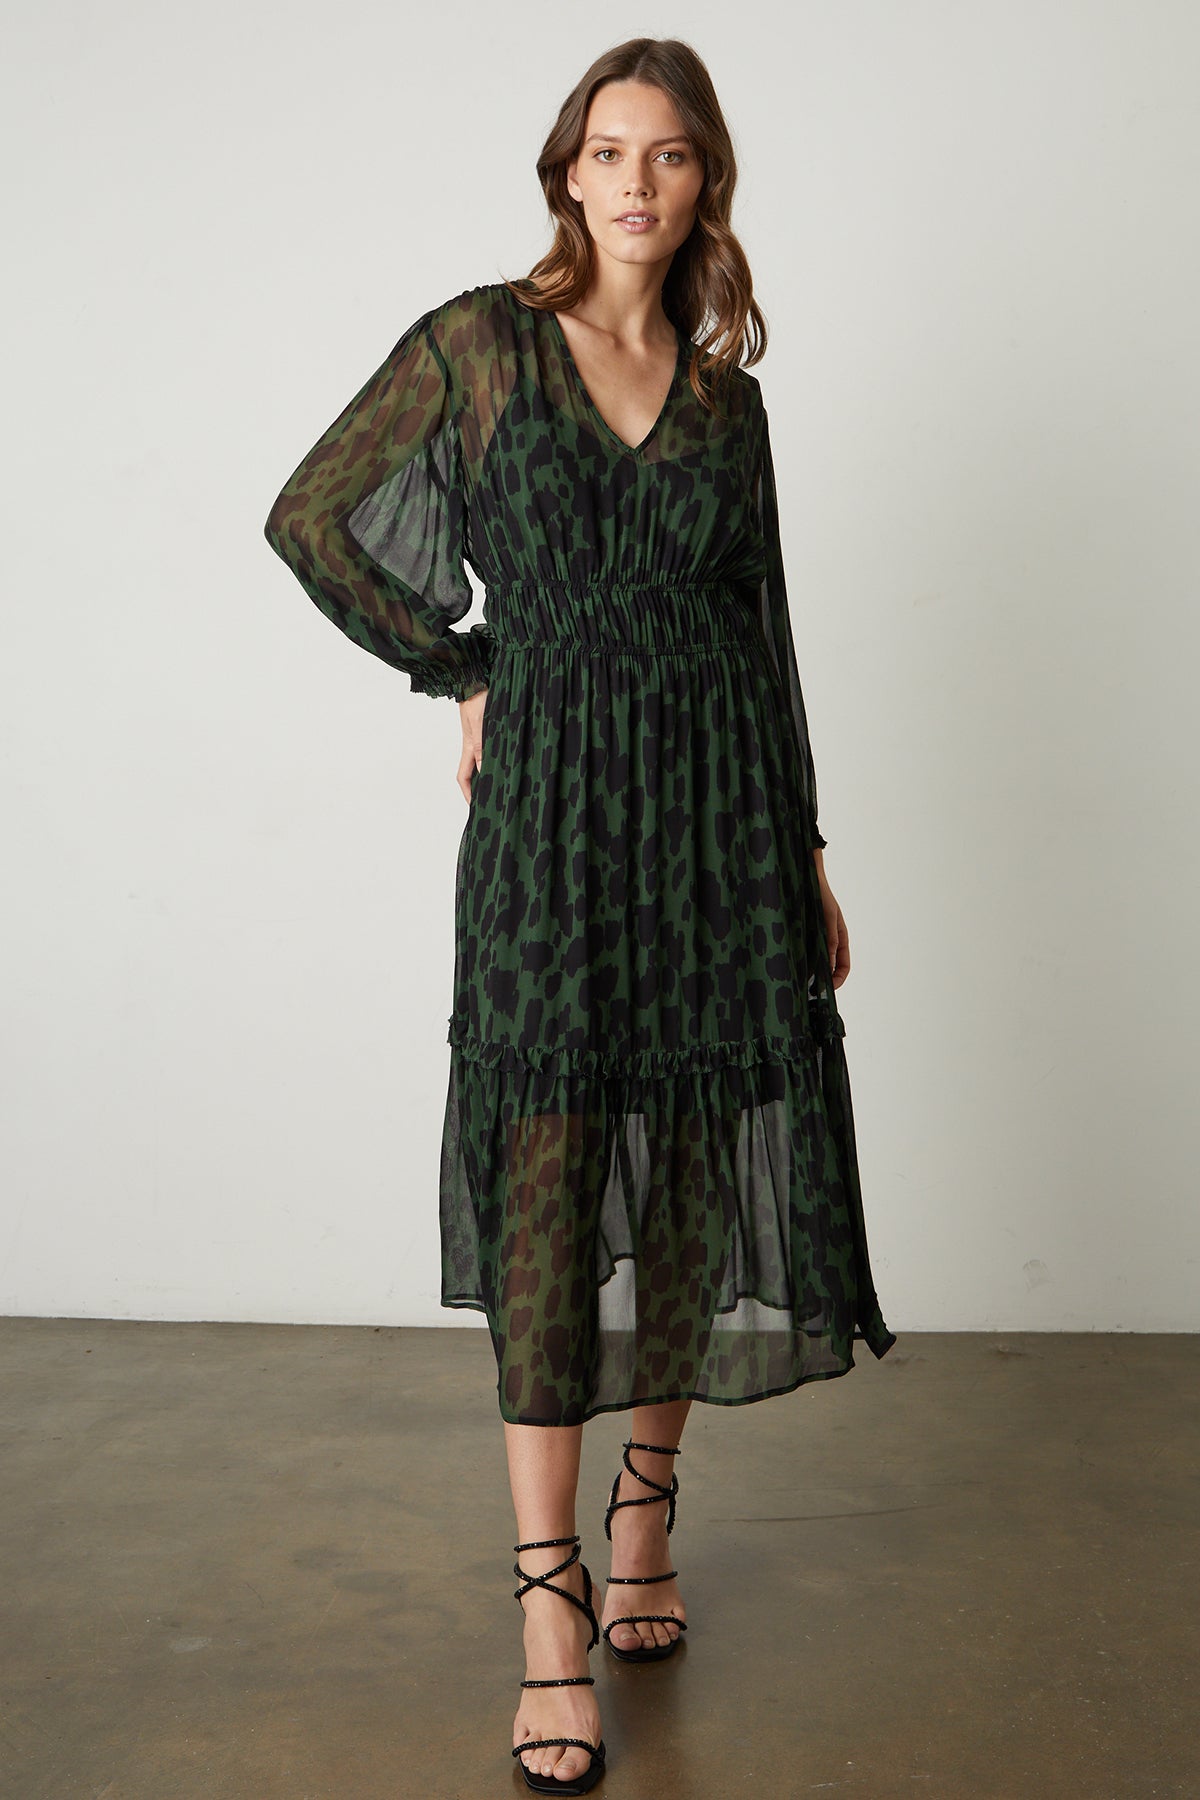   Kendra Printed Maxi Dress in green and black airbrush print with black sandals full length front 